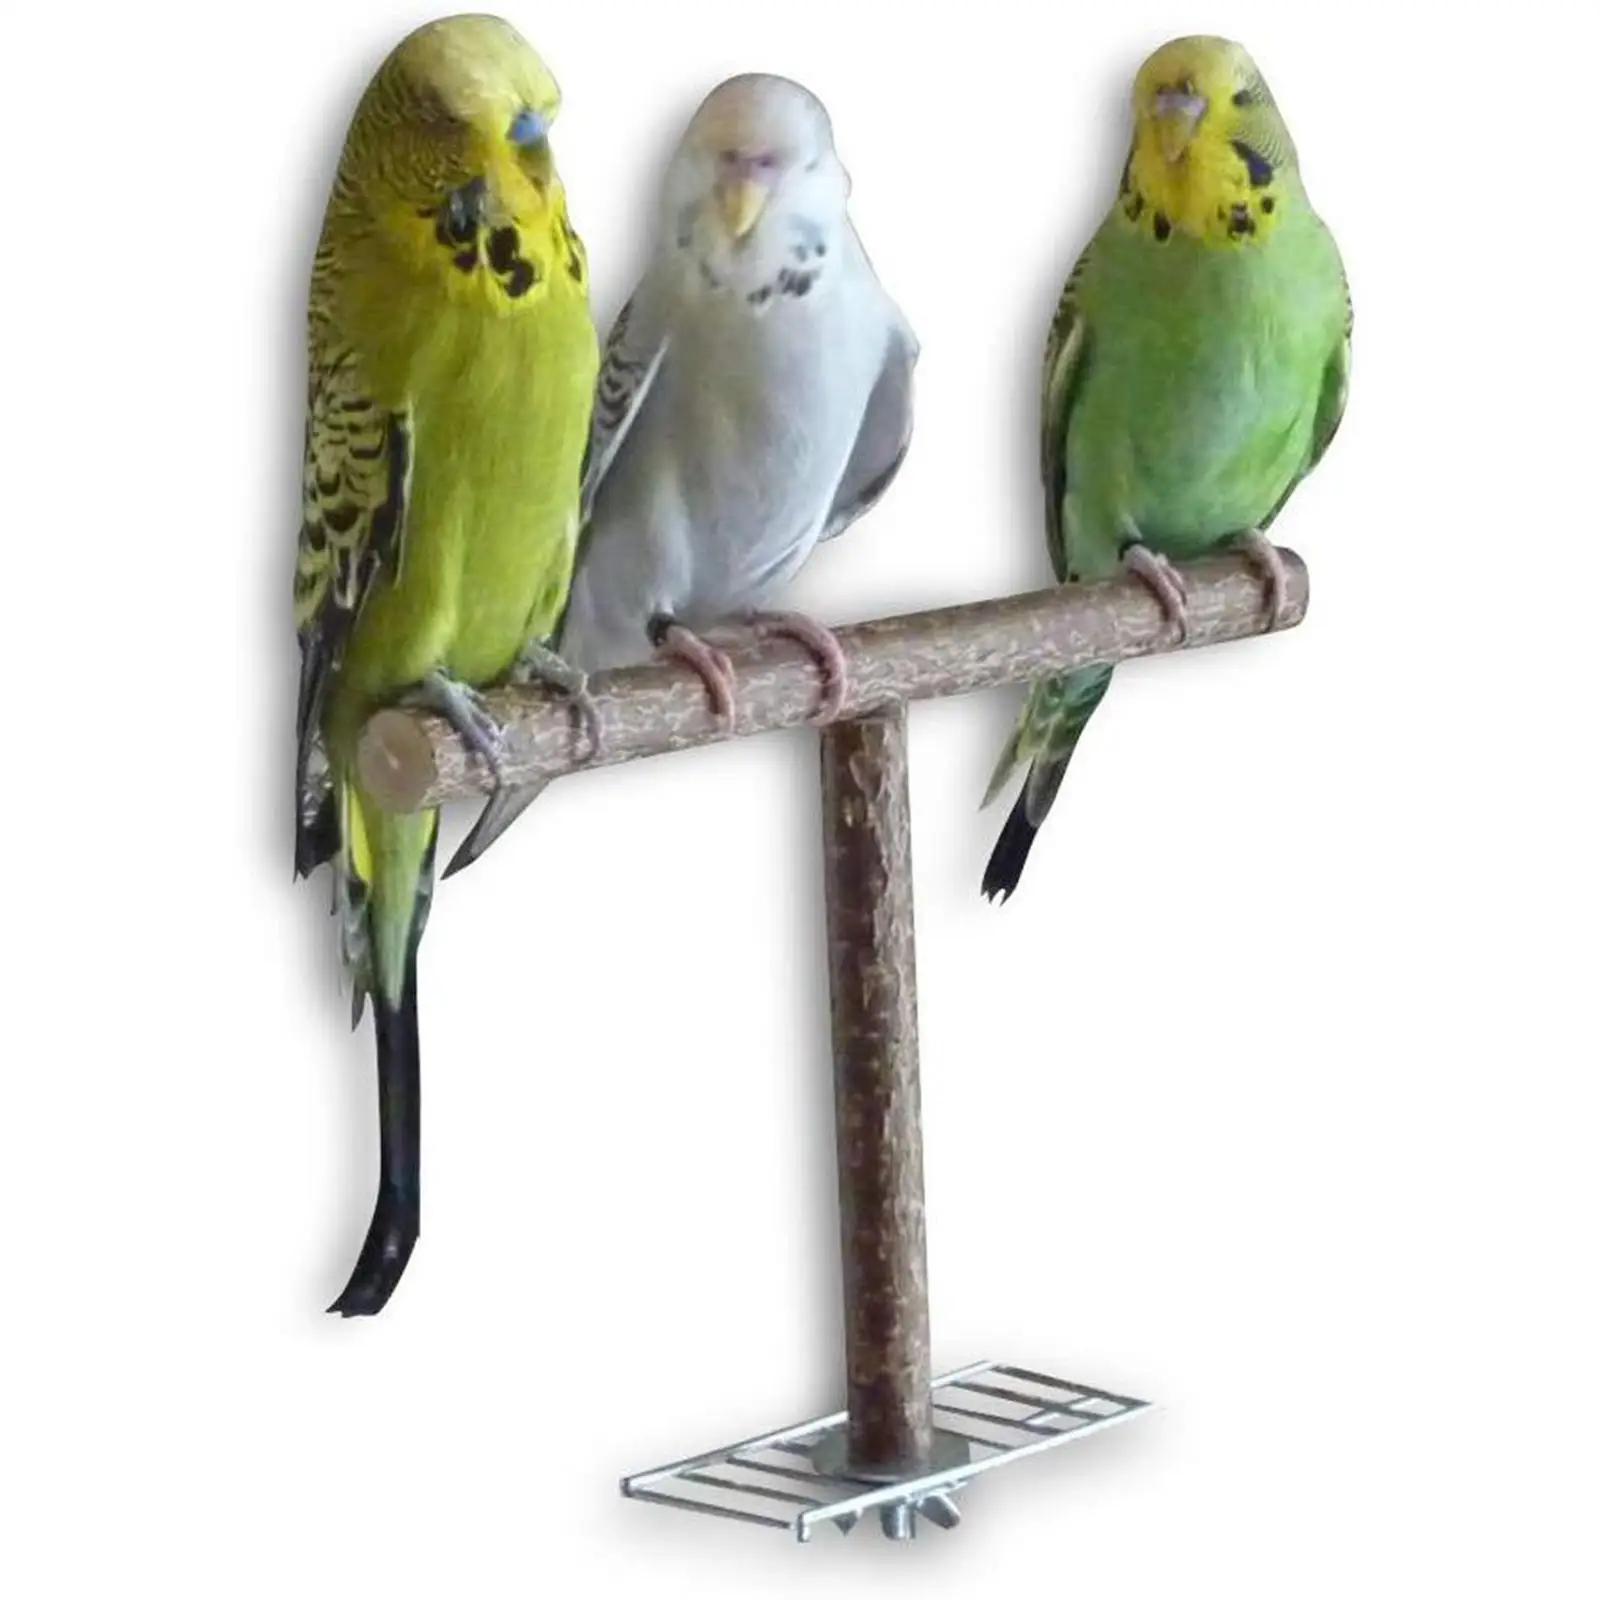 Parrot Stand Parrot Wooden Perch Bird stand Budgie Parakeets Exercise Branch